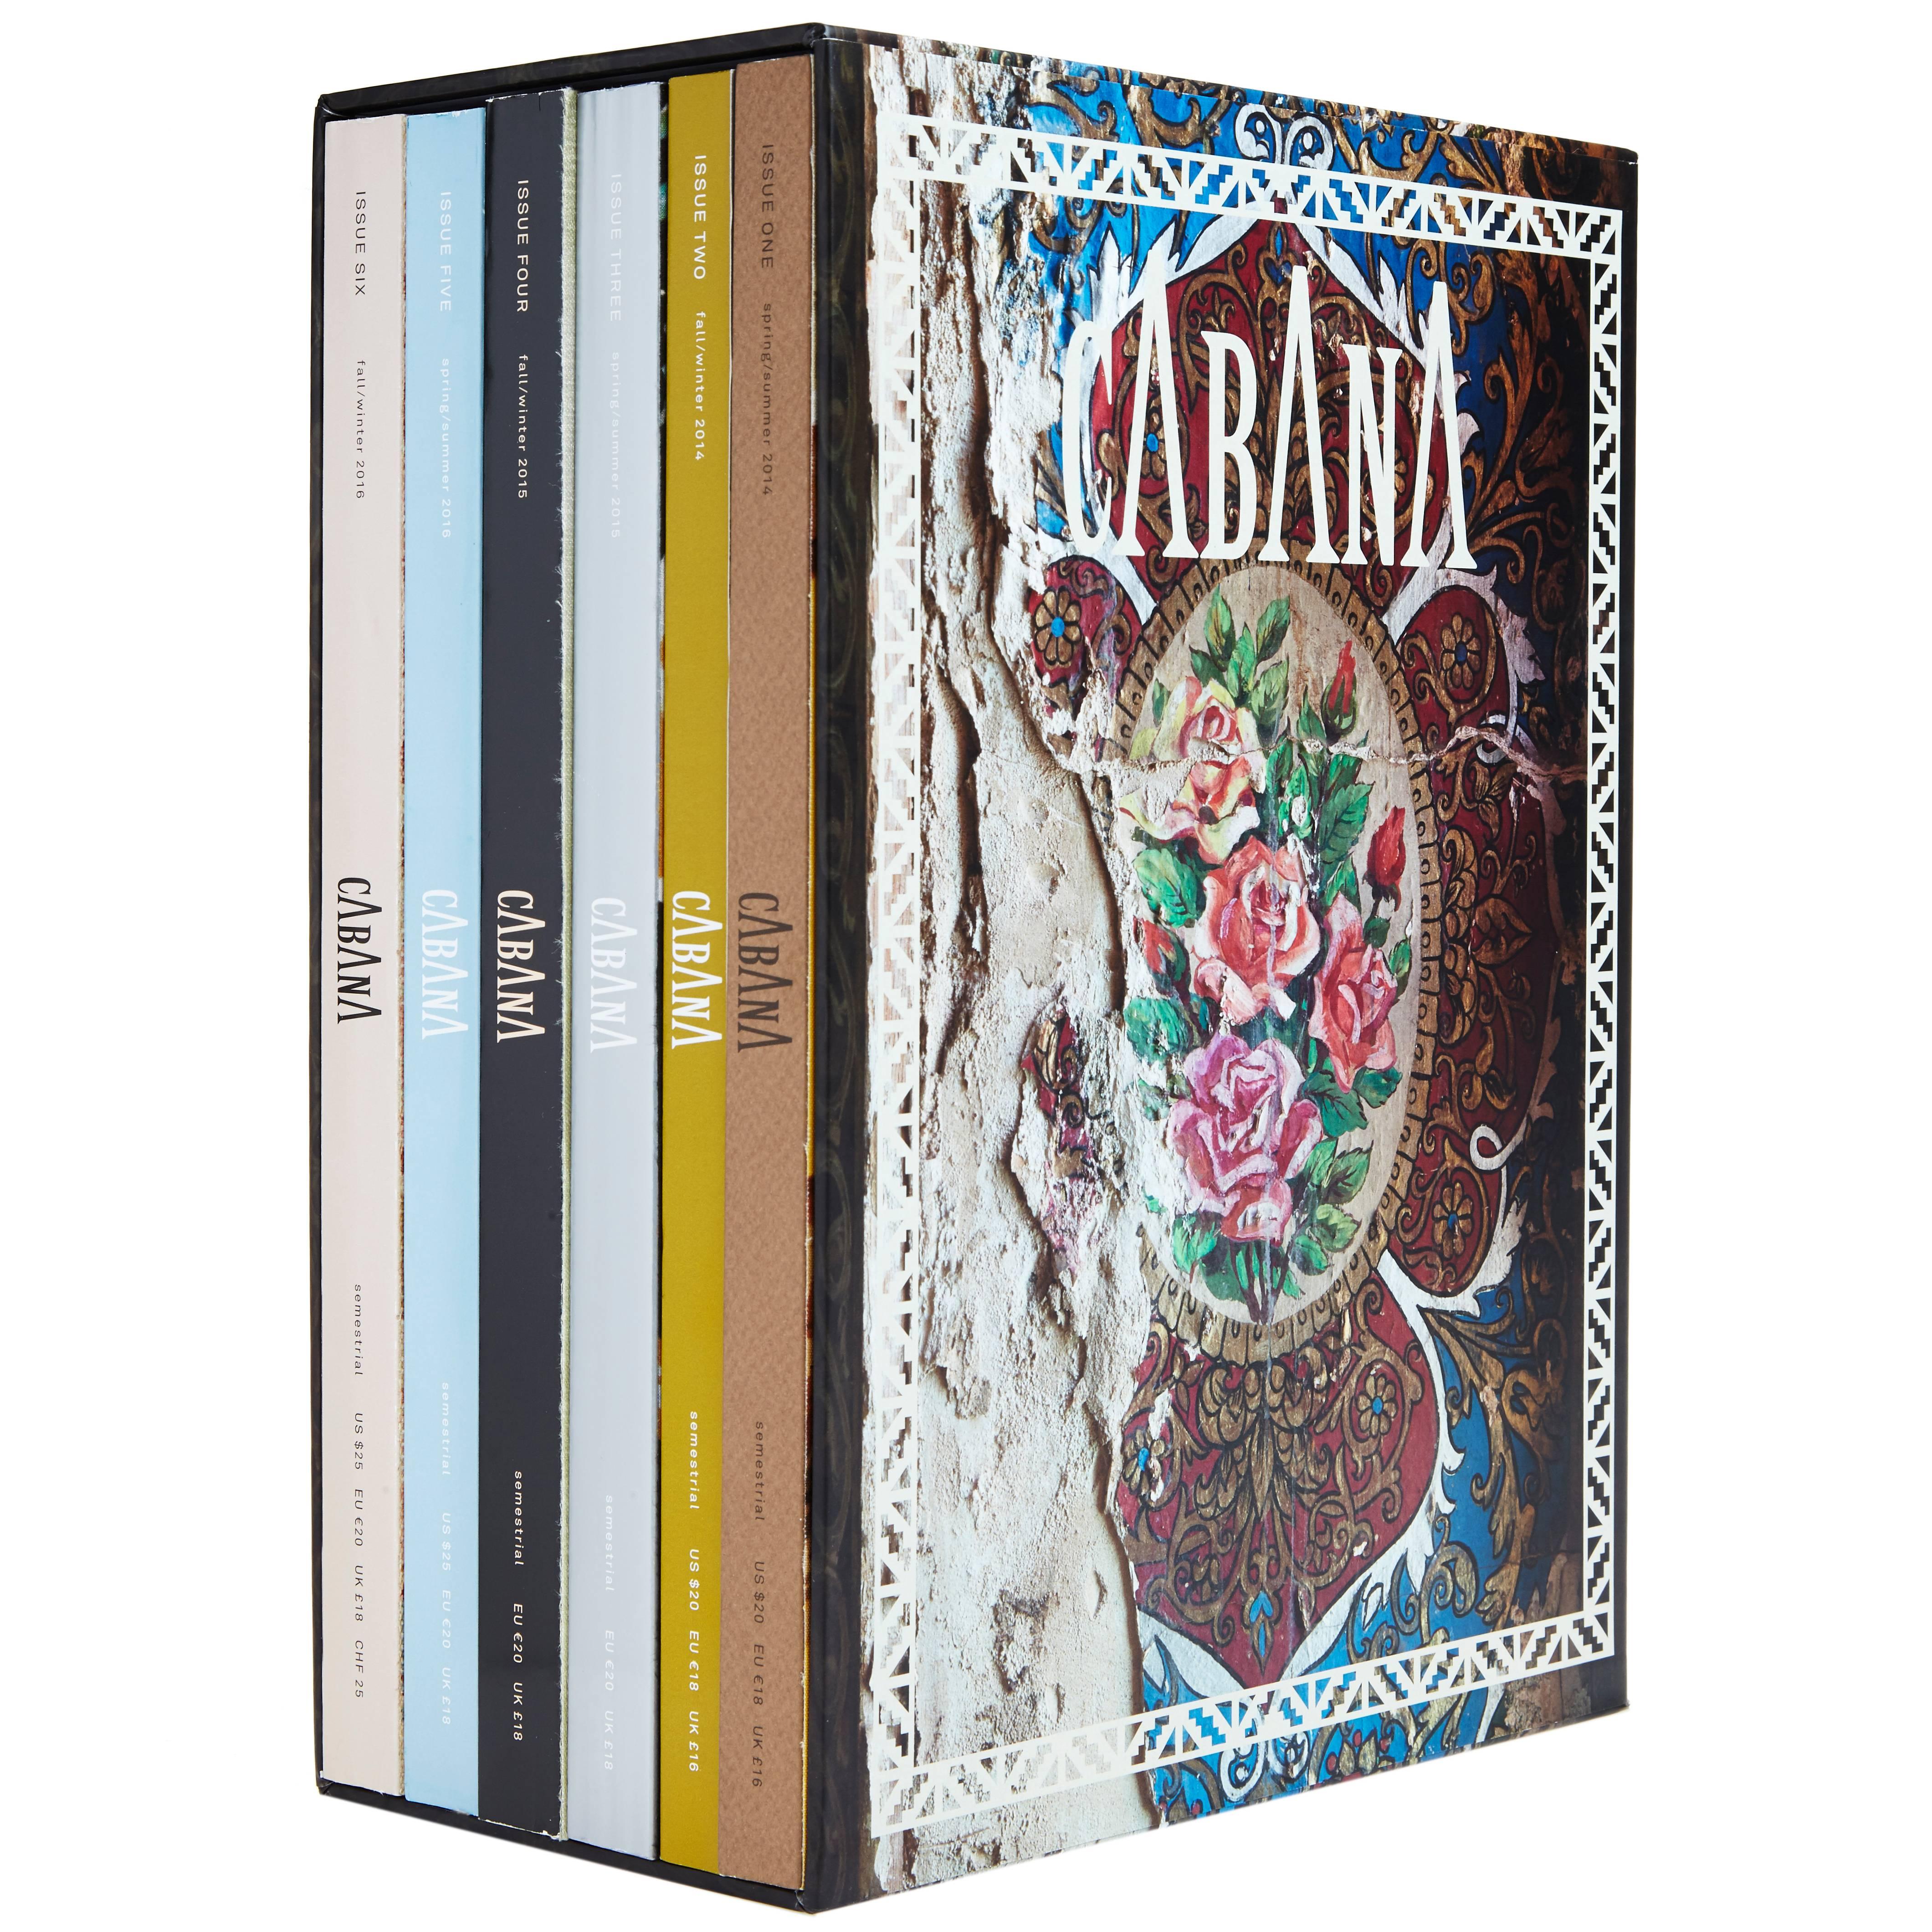 Limited Edition Cabana Box Set, with All Six Issues